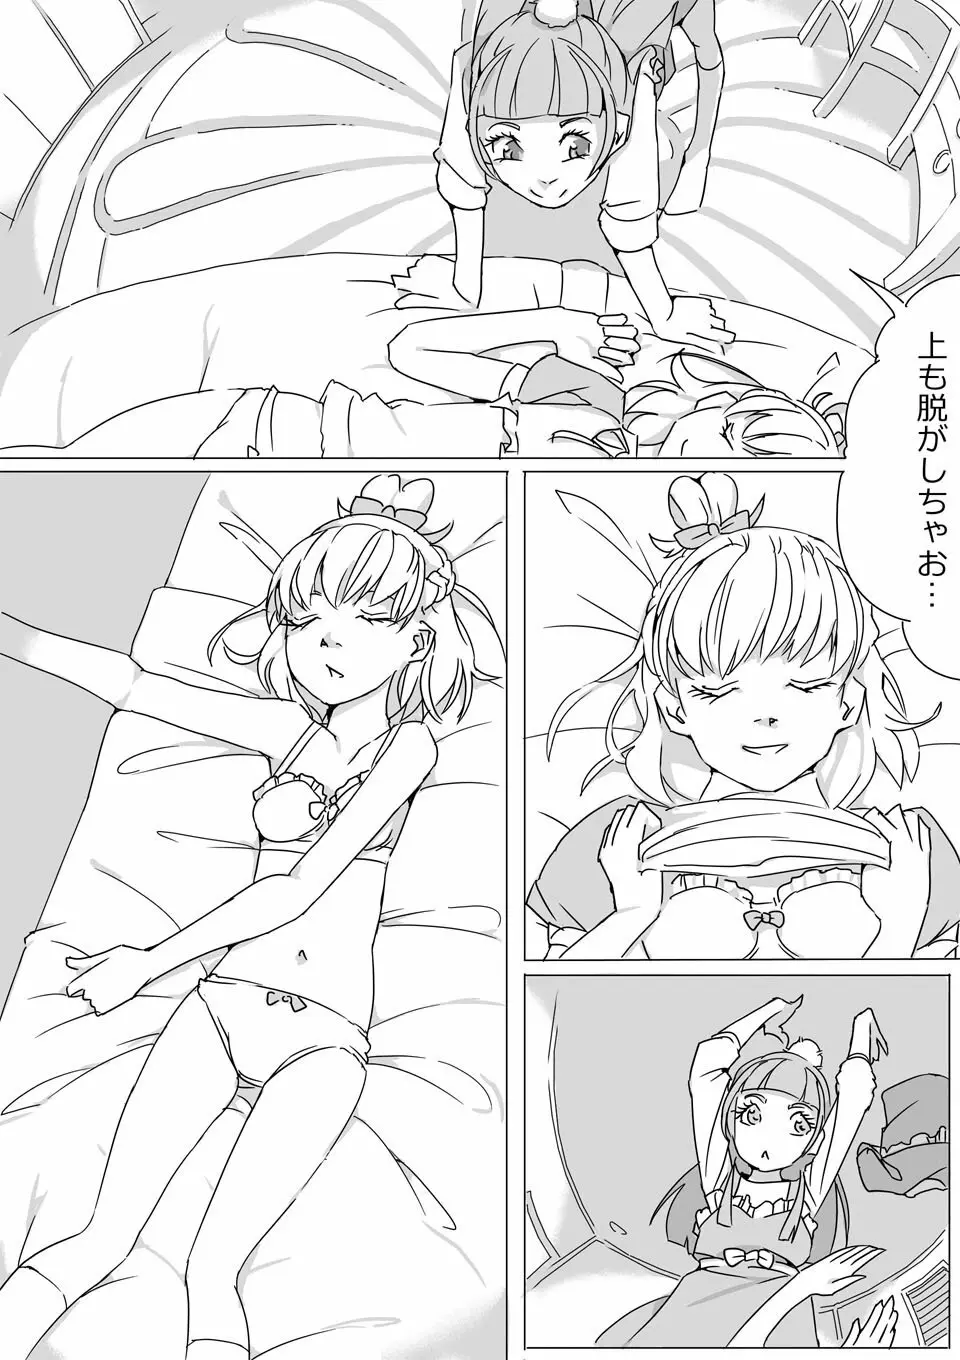 Untitled Precure Doujinshi - page7